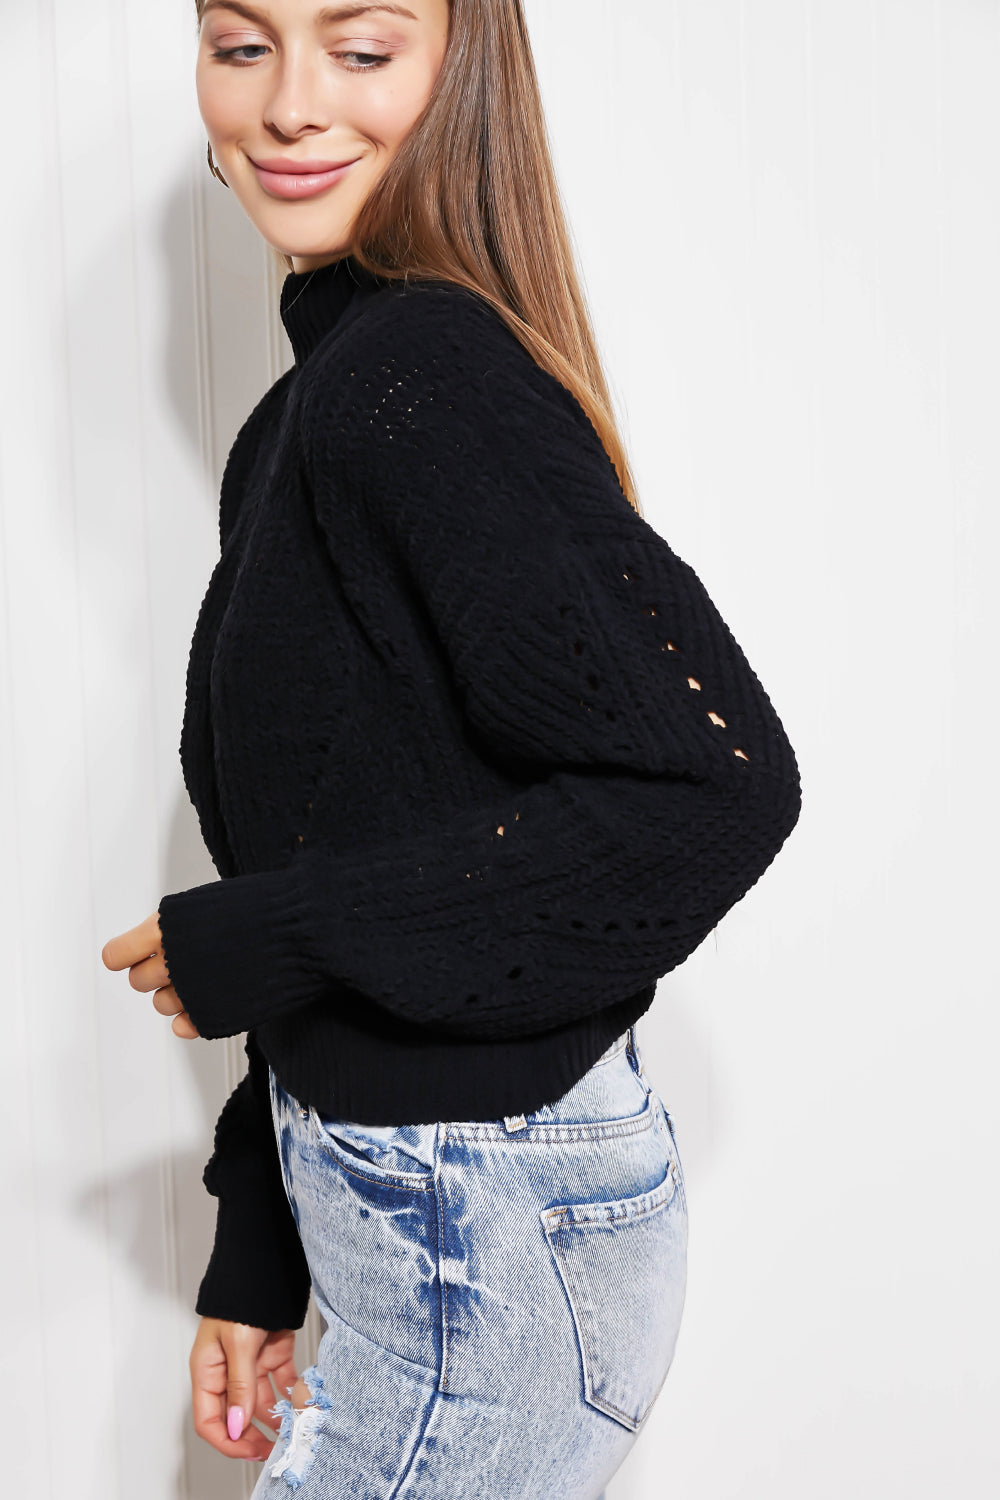 Chilly Morning Cropped Turtleneck Sweater